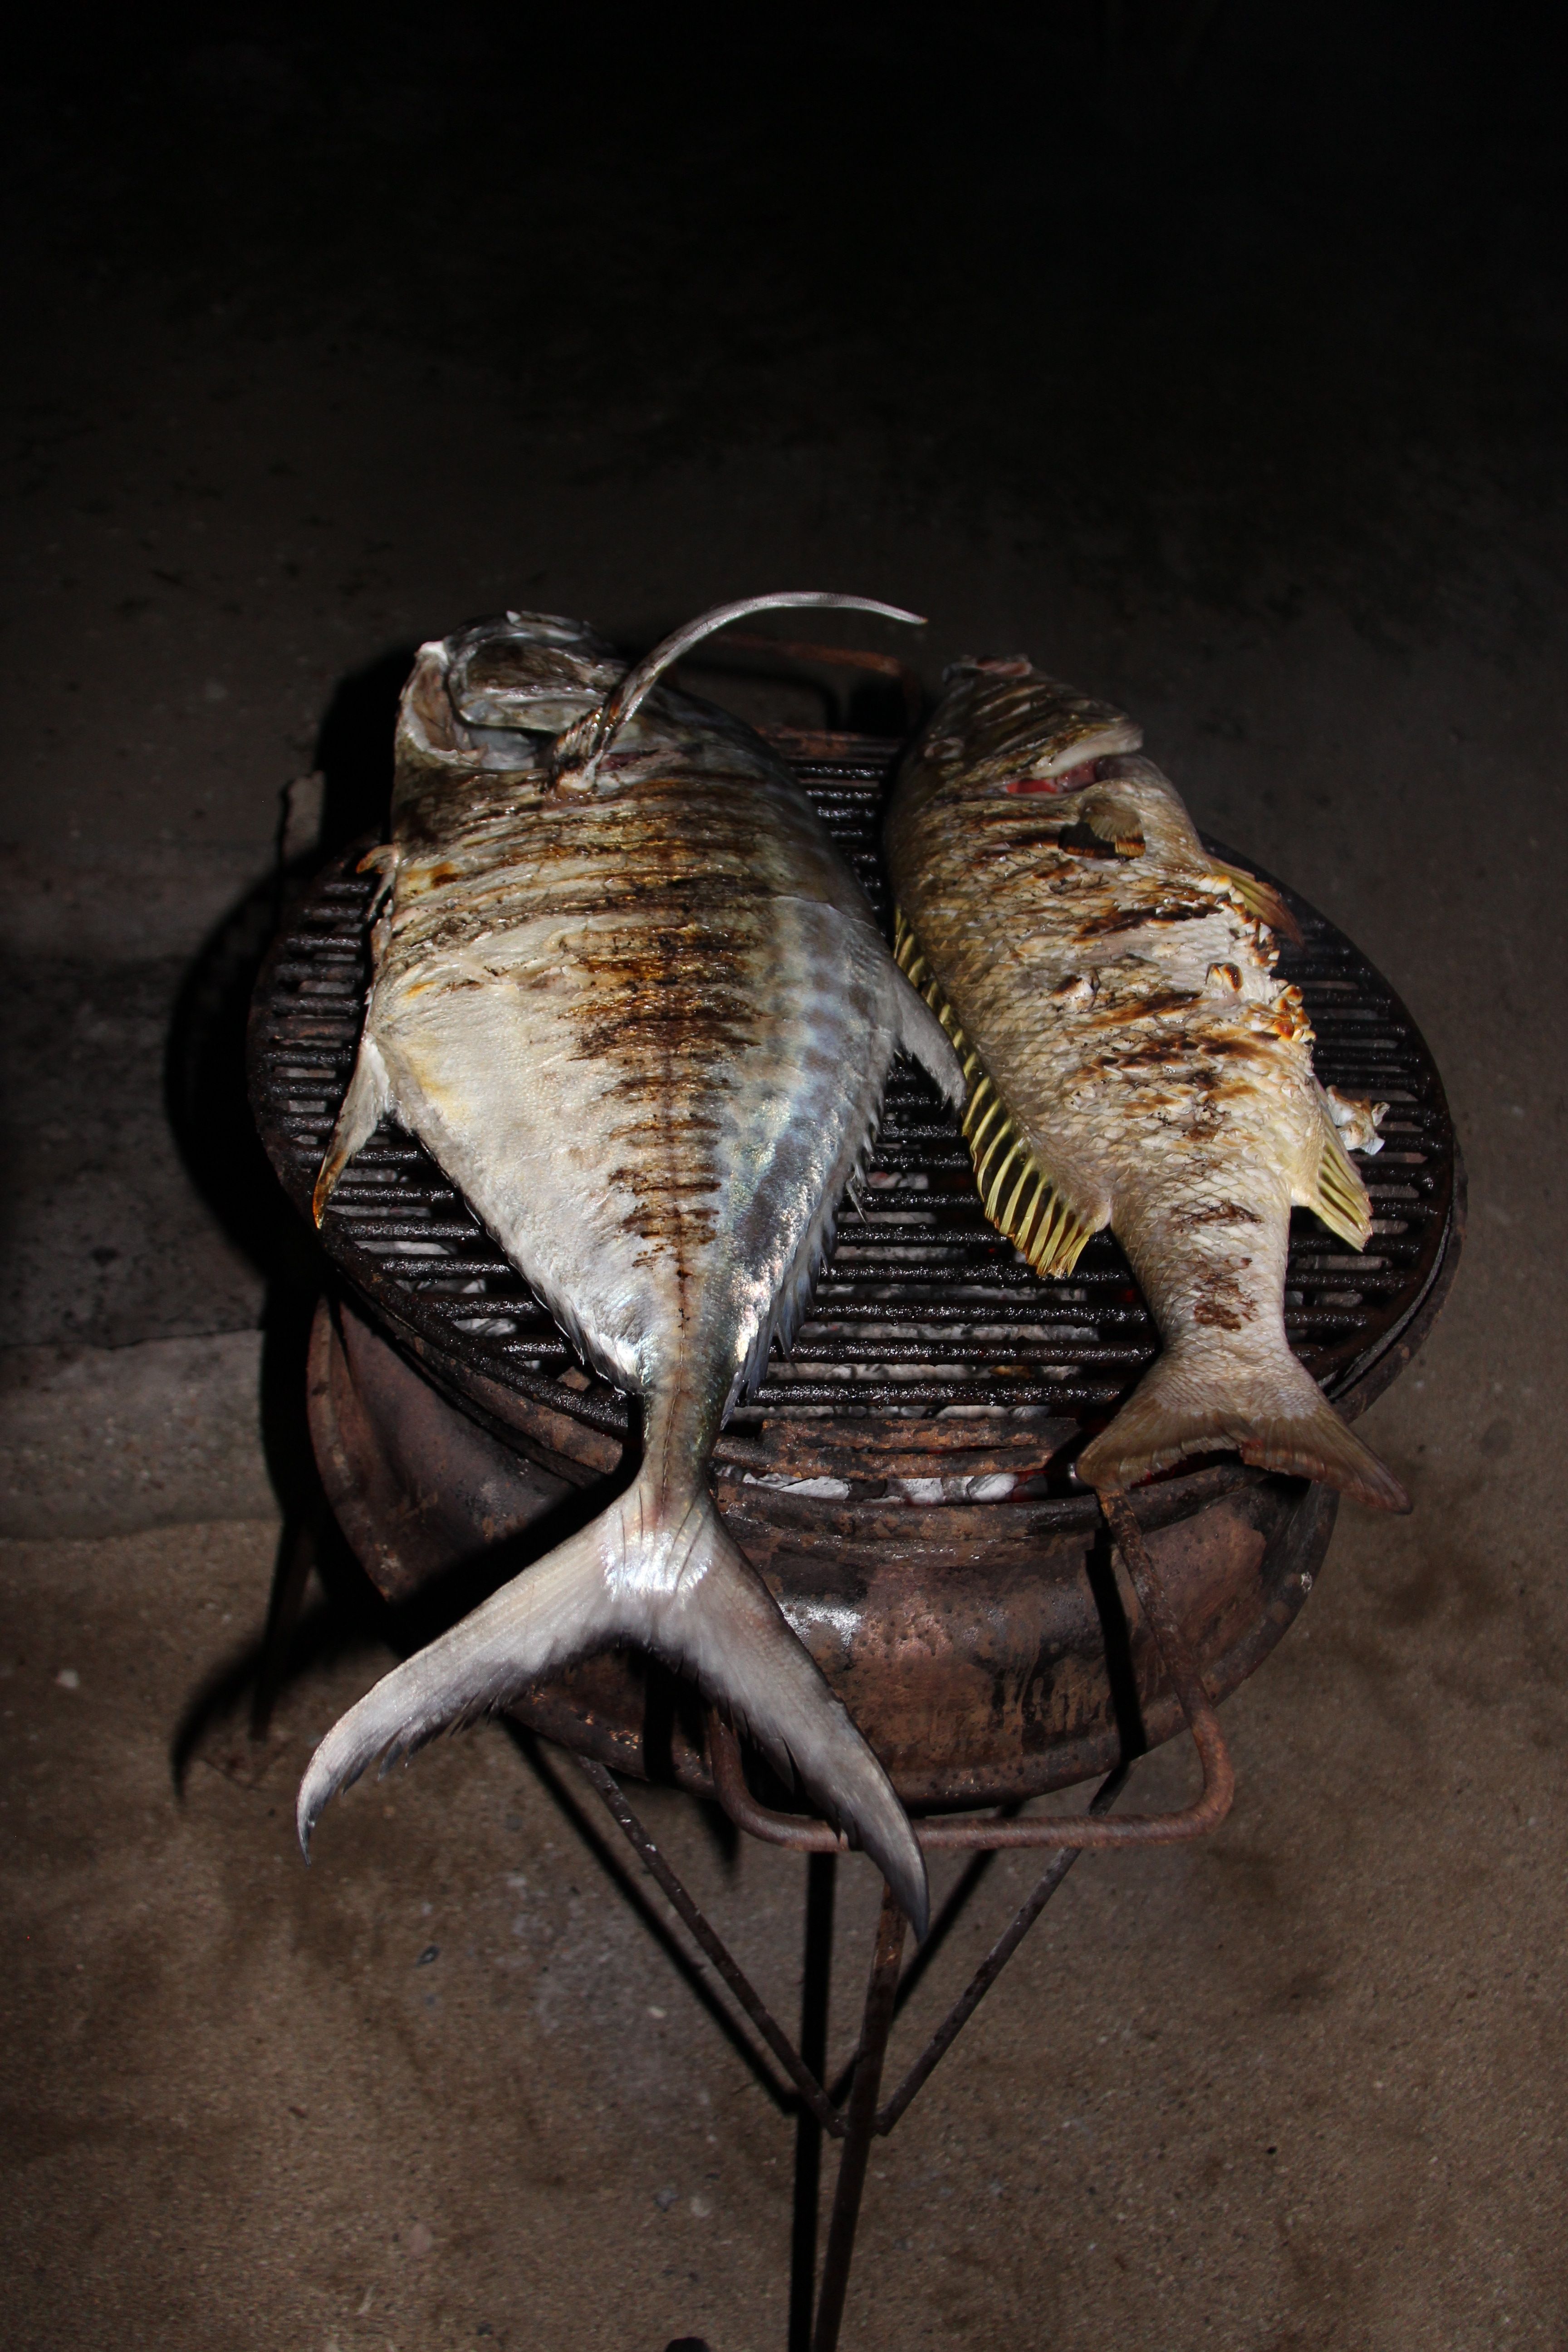 Poisson grillé au barbecue - Tao expeditions Palawan